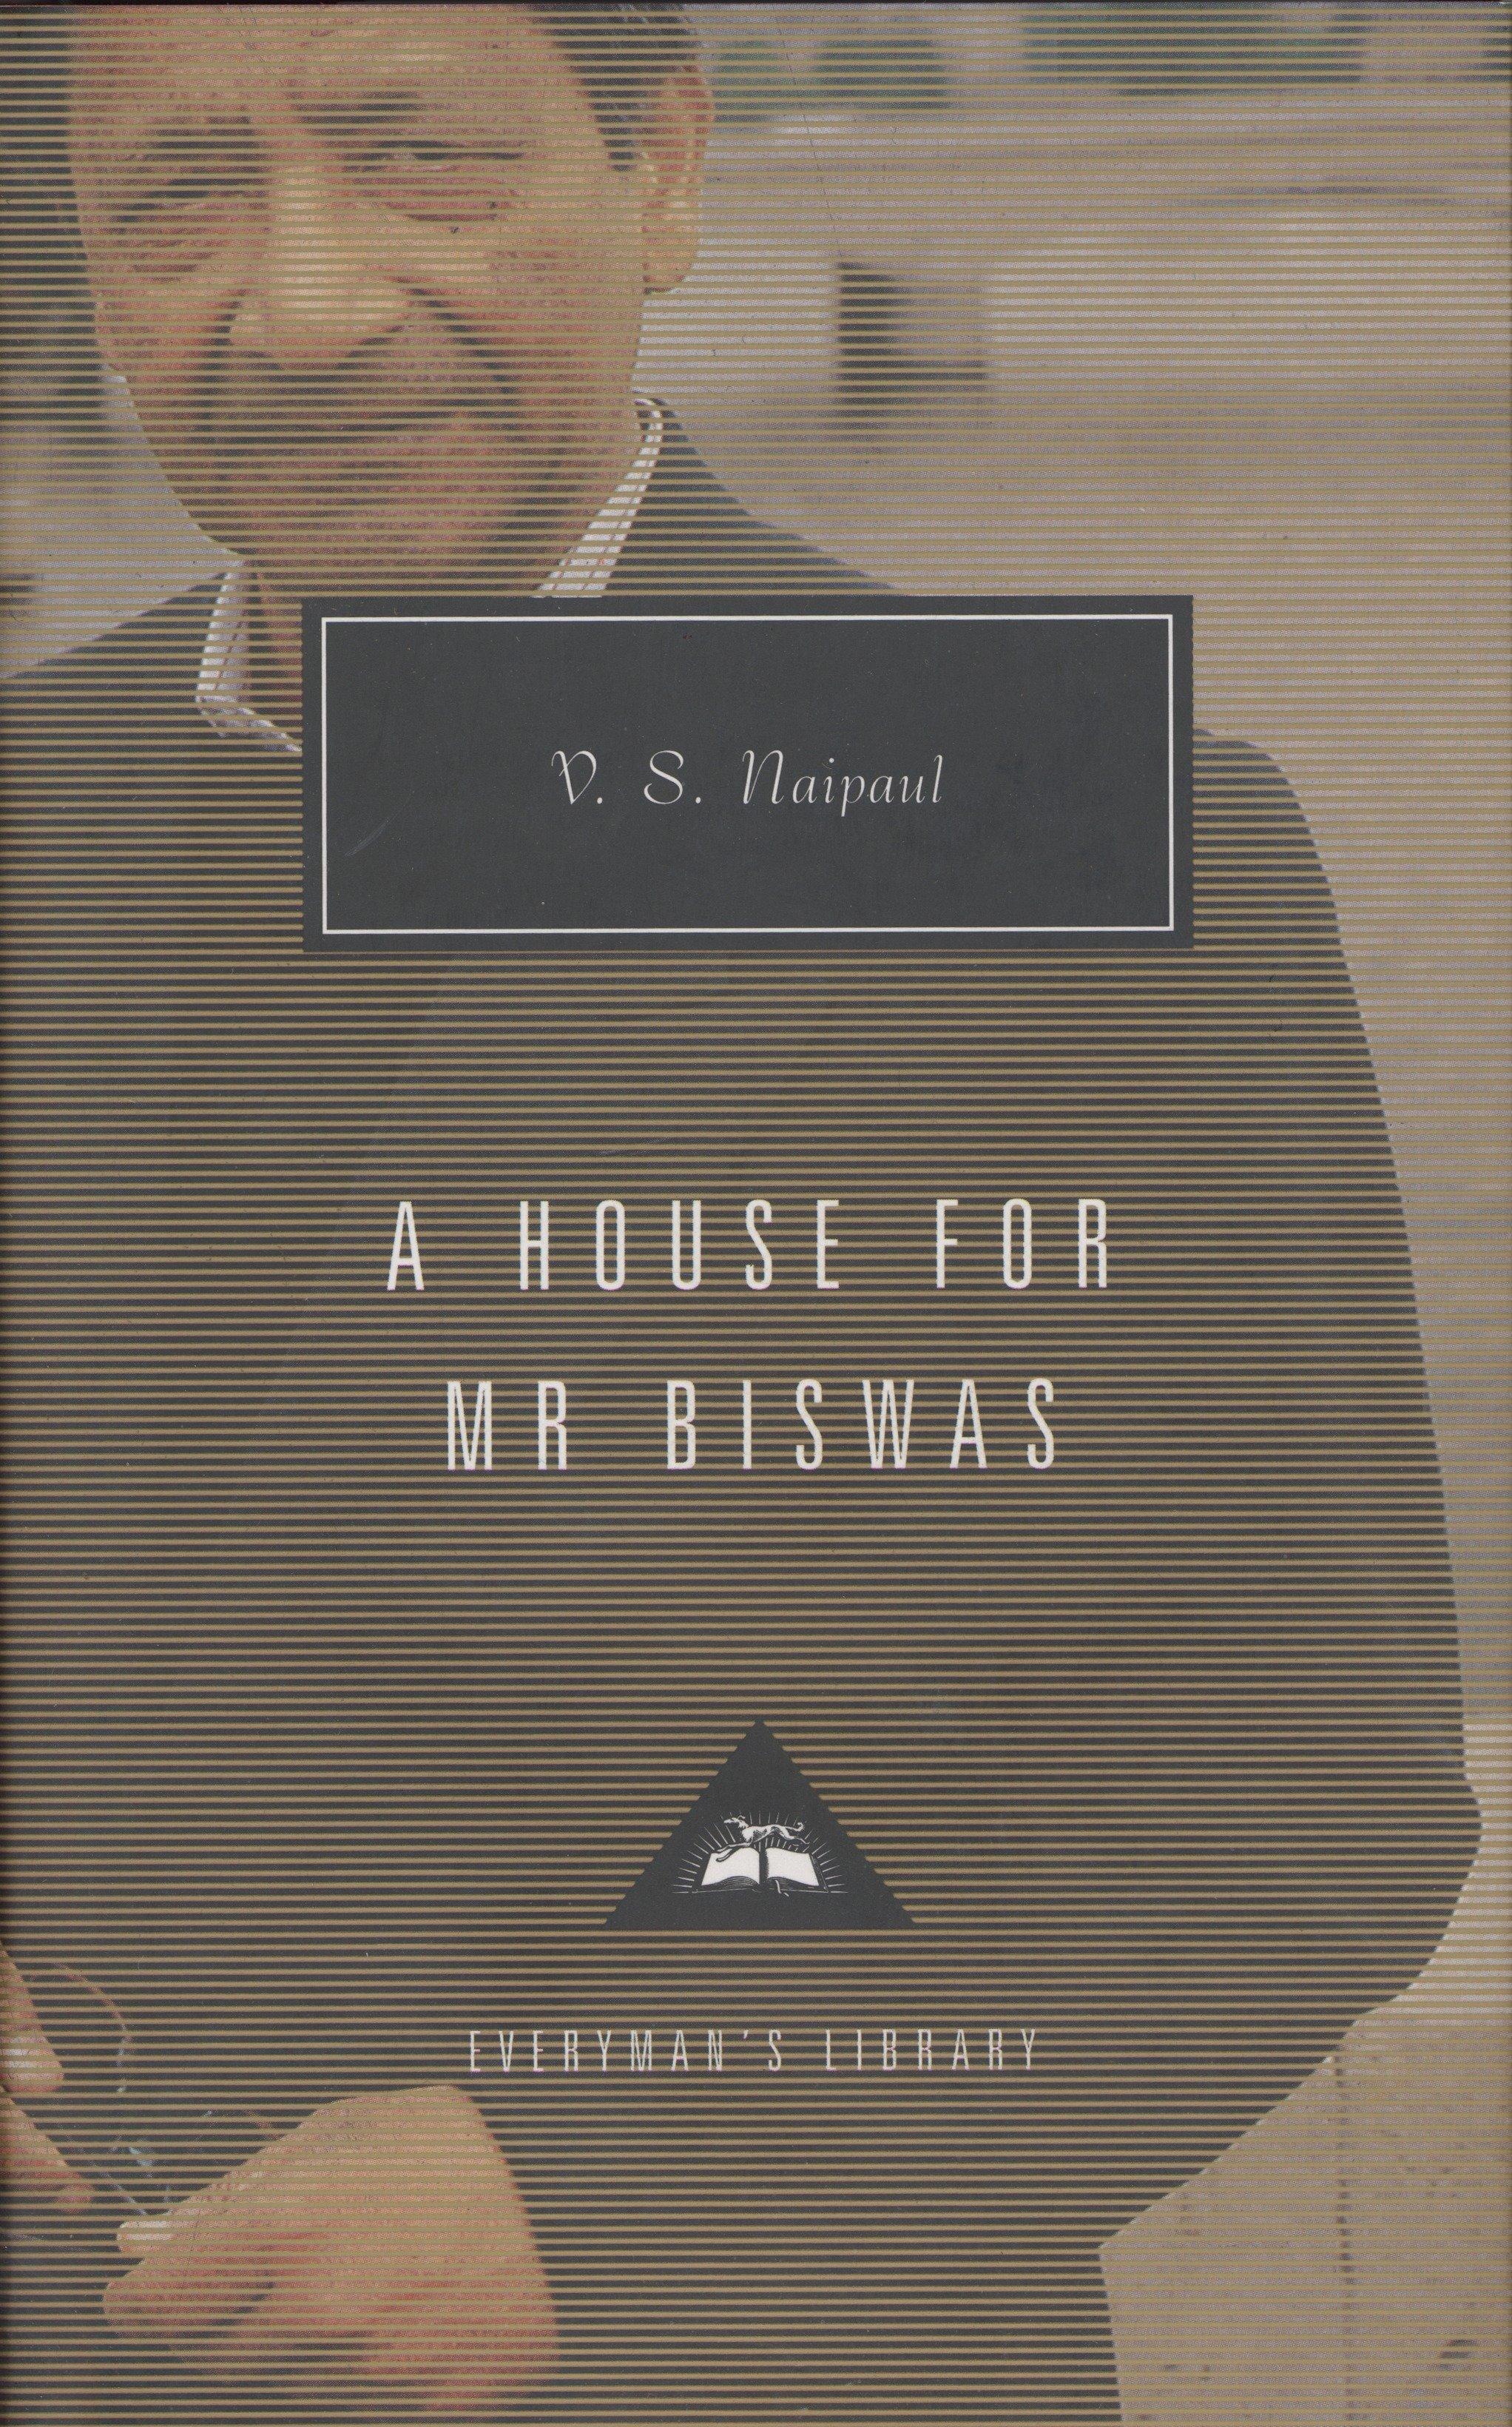 A House for Mr. Biswas: Introduction by Karl Miller | V. S. Naipaul | Buch | Everyman's Library Contemporar | Englisch | 1995 | EVERYMANS LIB | EAN 9780679444589 - Naipaul, V. S.